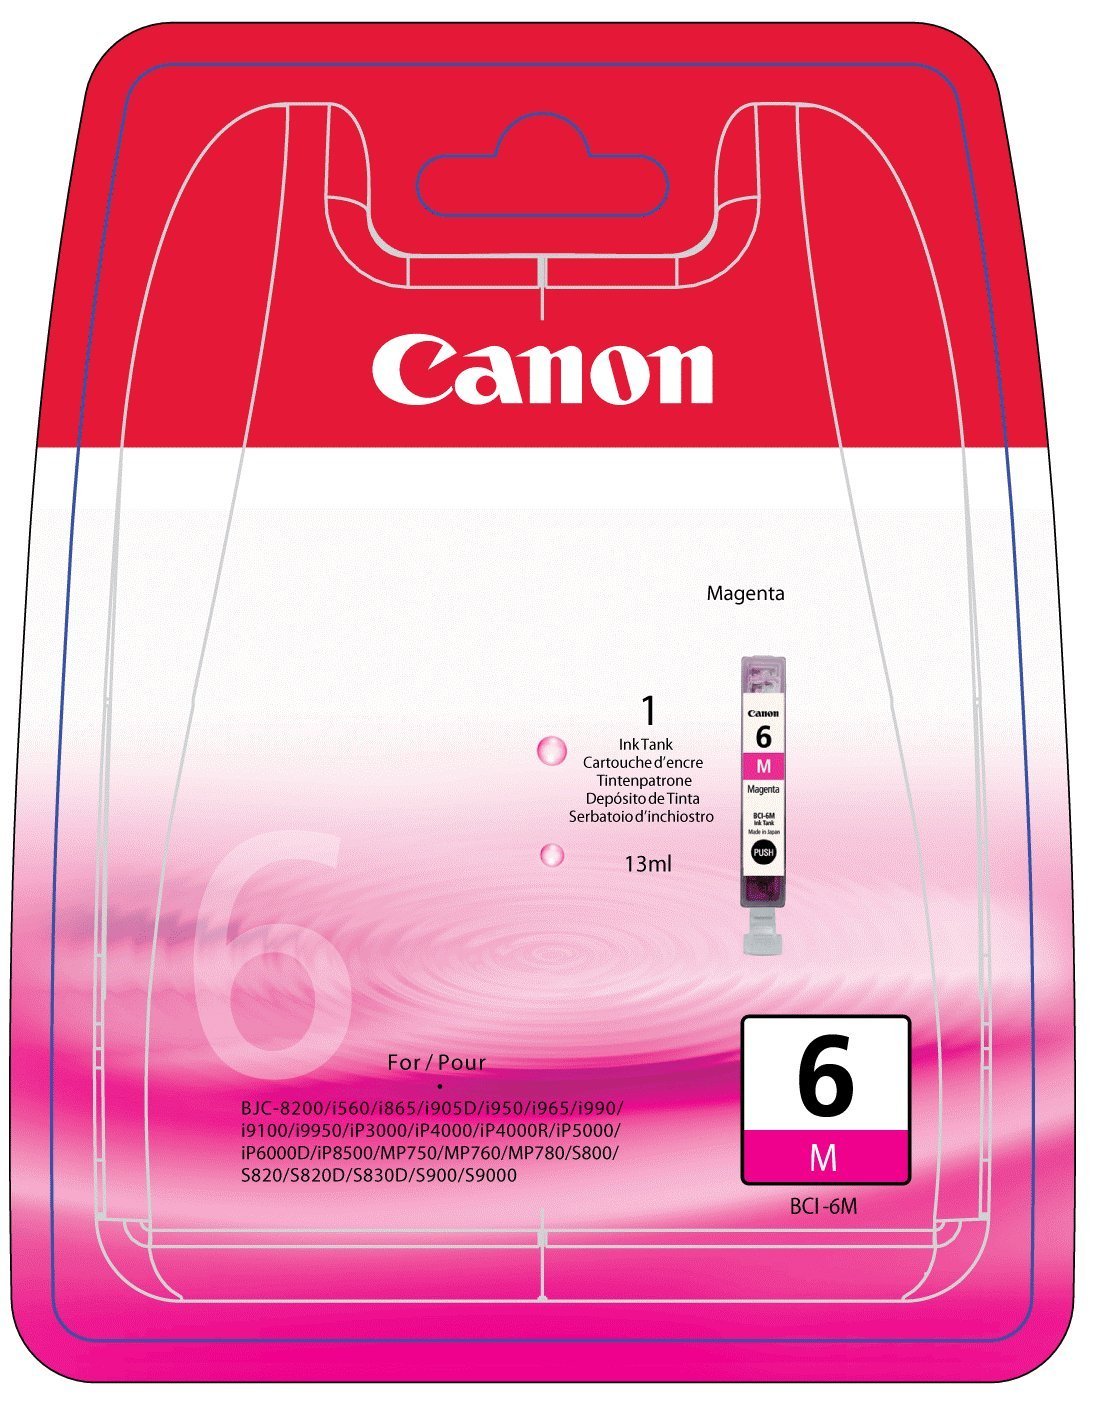 Related to CANNON I900D INK: BCI-6M